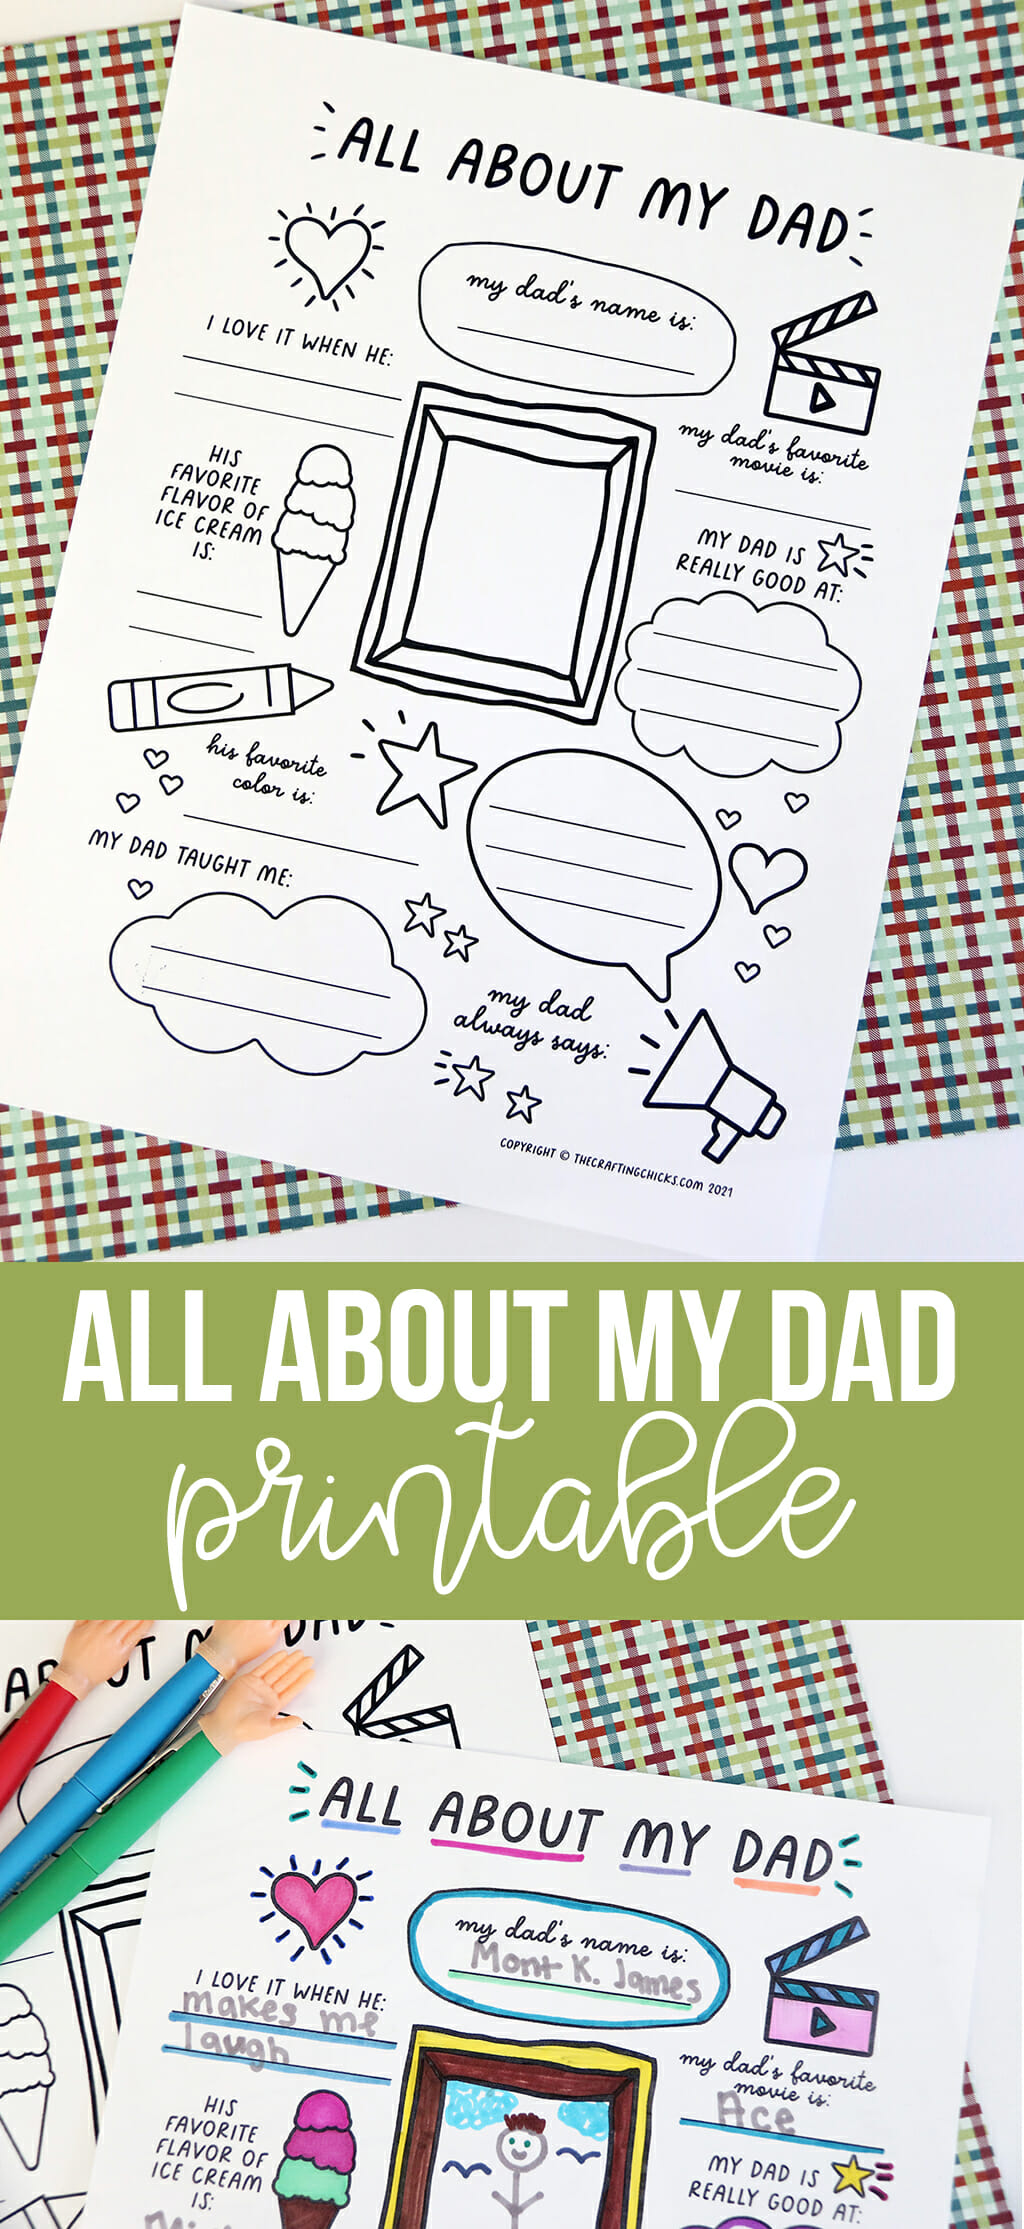 All About My Dad Free Printable LaptrinhX News